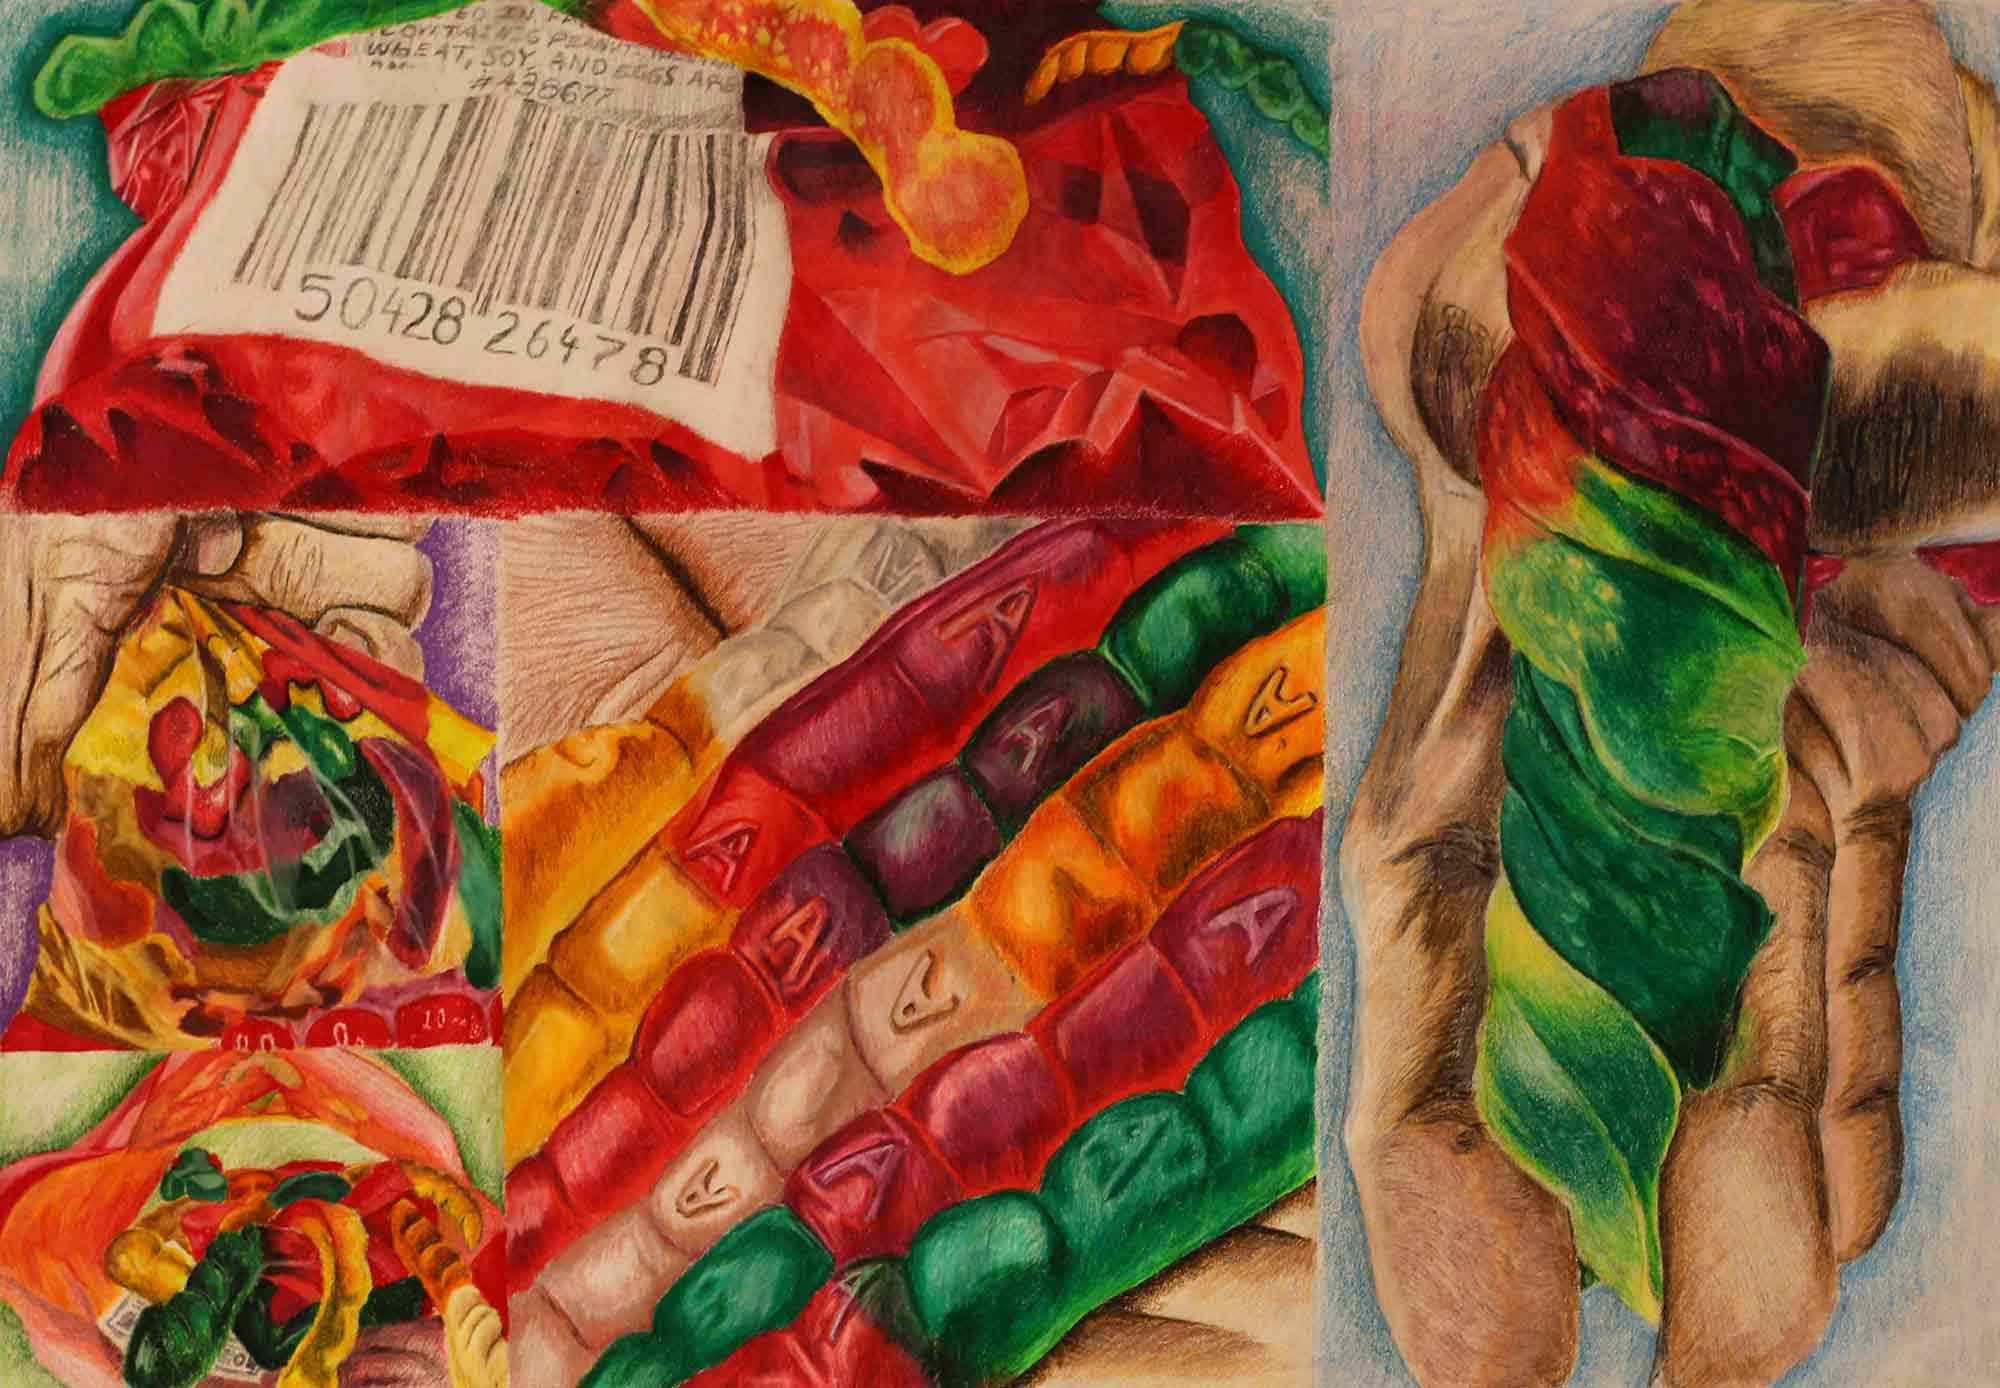 Collaged drawings of gummy worms